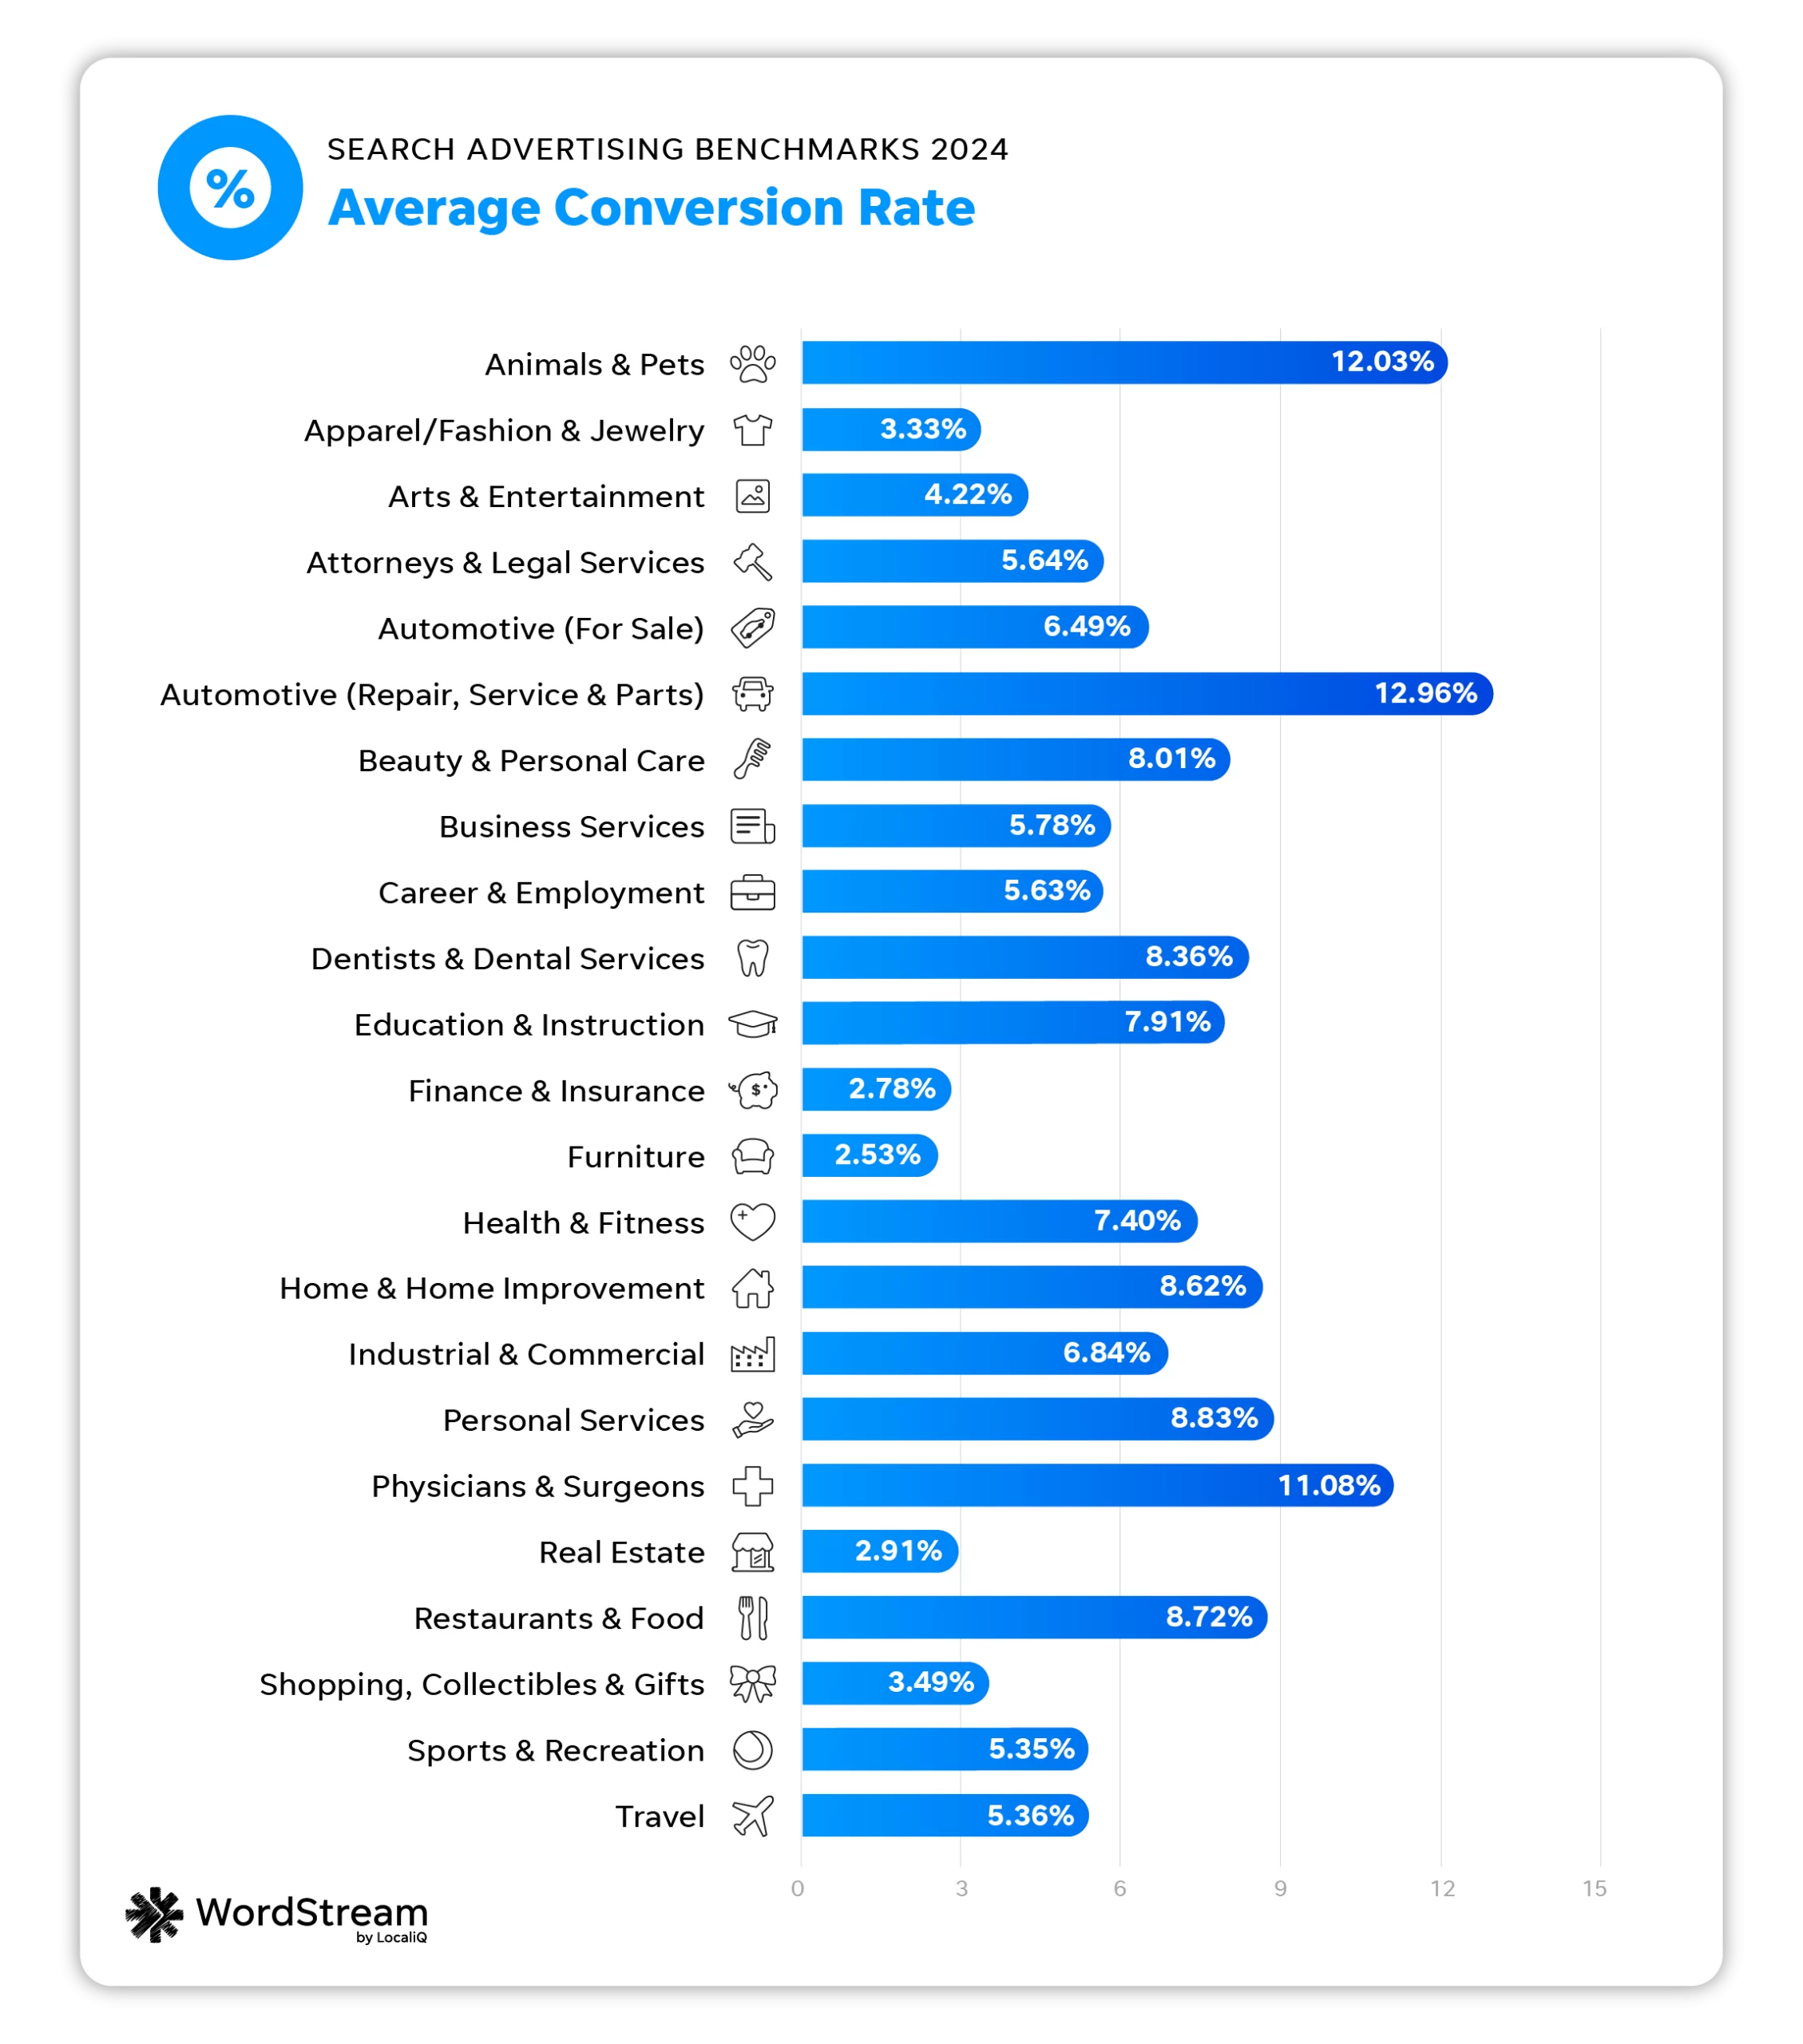 google ads benchmarks - average conversion rate 2024 chart